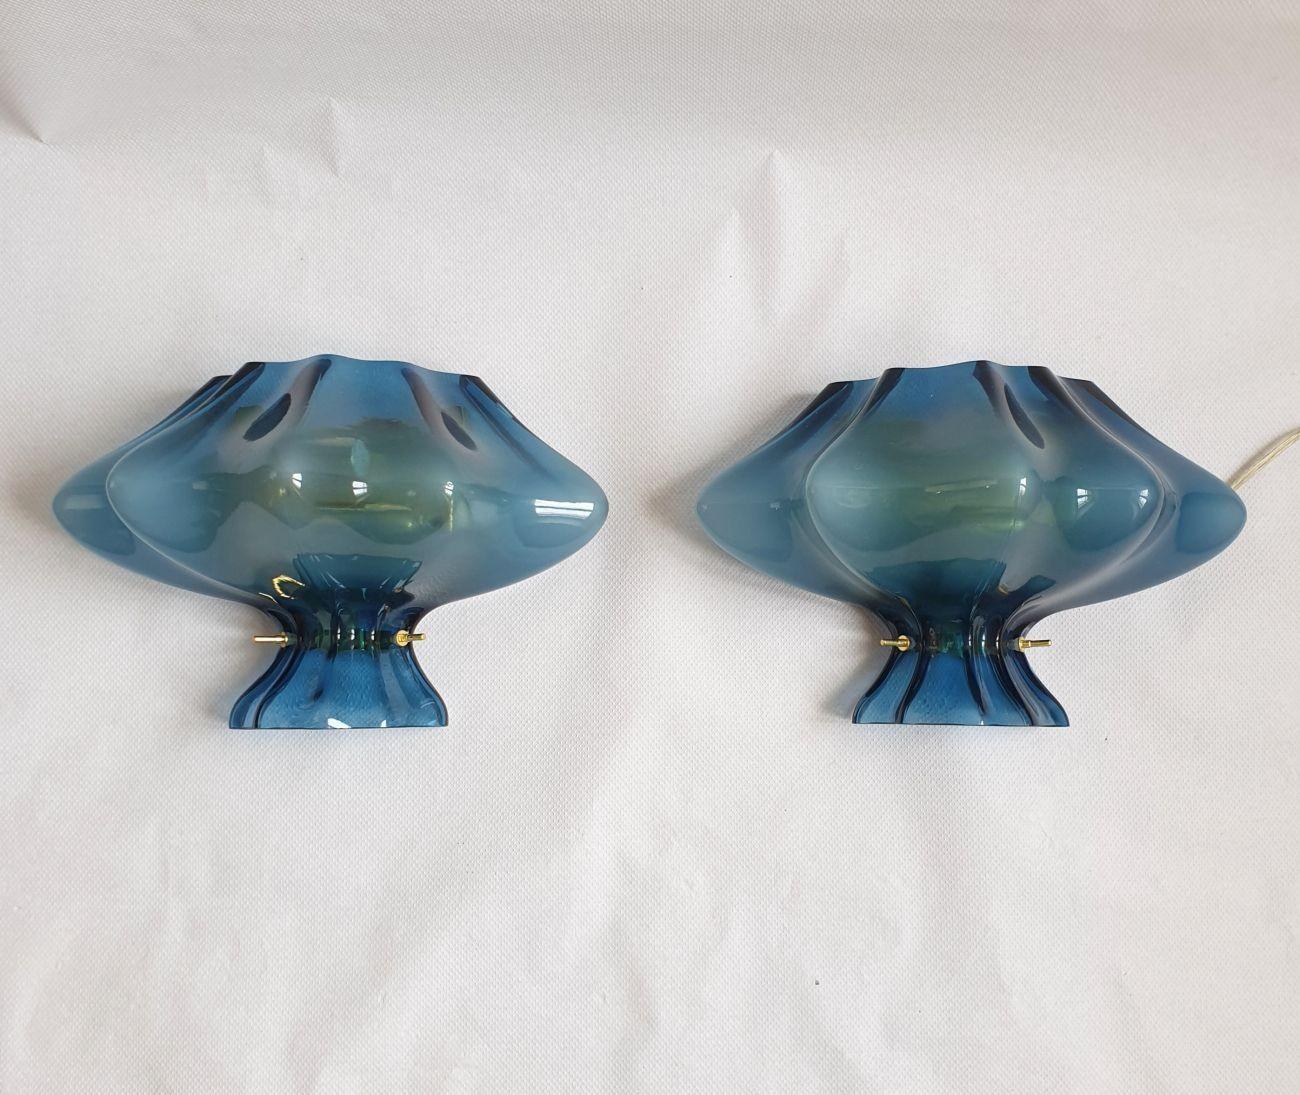 Pair of Murano glass Mid-Century Modern wall sconces, Italy 1980s. Attributed to Cenedese.
The sconces are made of a single piece of Murano glass, from Medium Blue to Light Baby Blue hues.
The Murano glass is translucent. The sconces create a